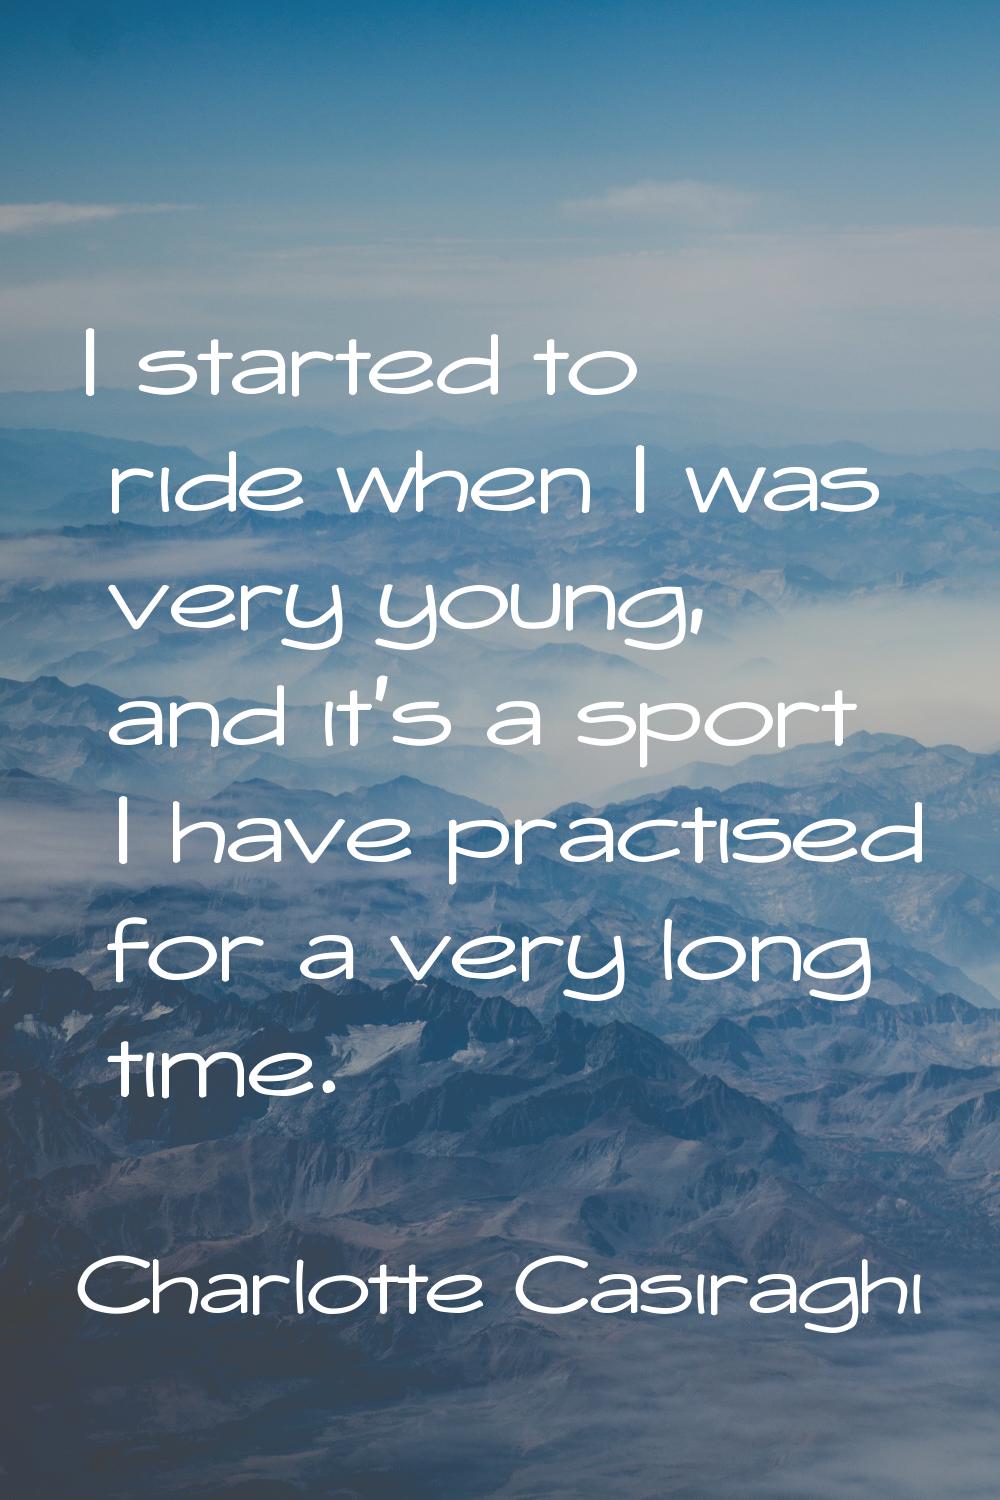 I started to ride when I was very young, and it's a sport I have practised for a very long time.